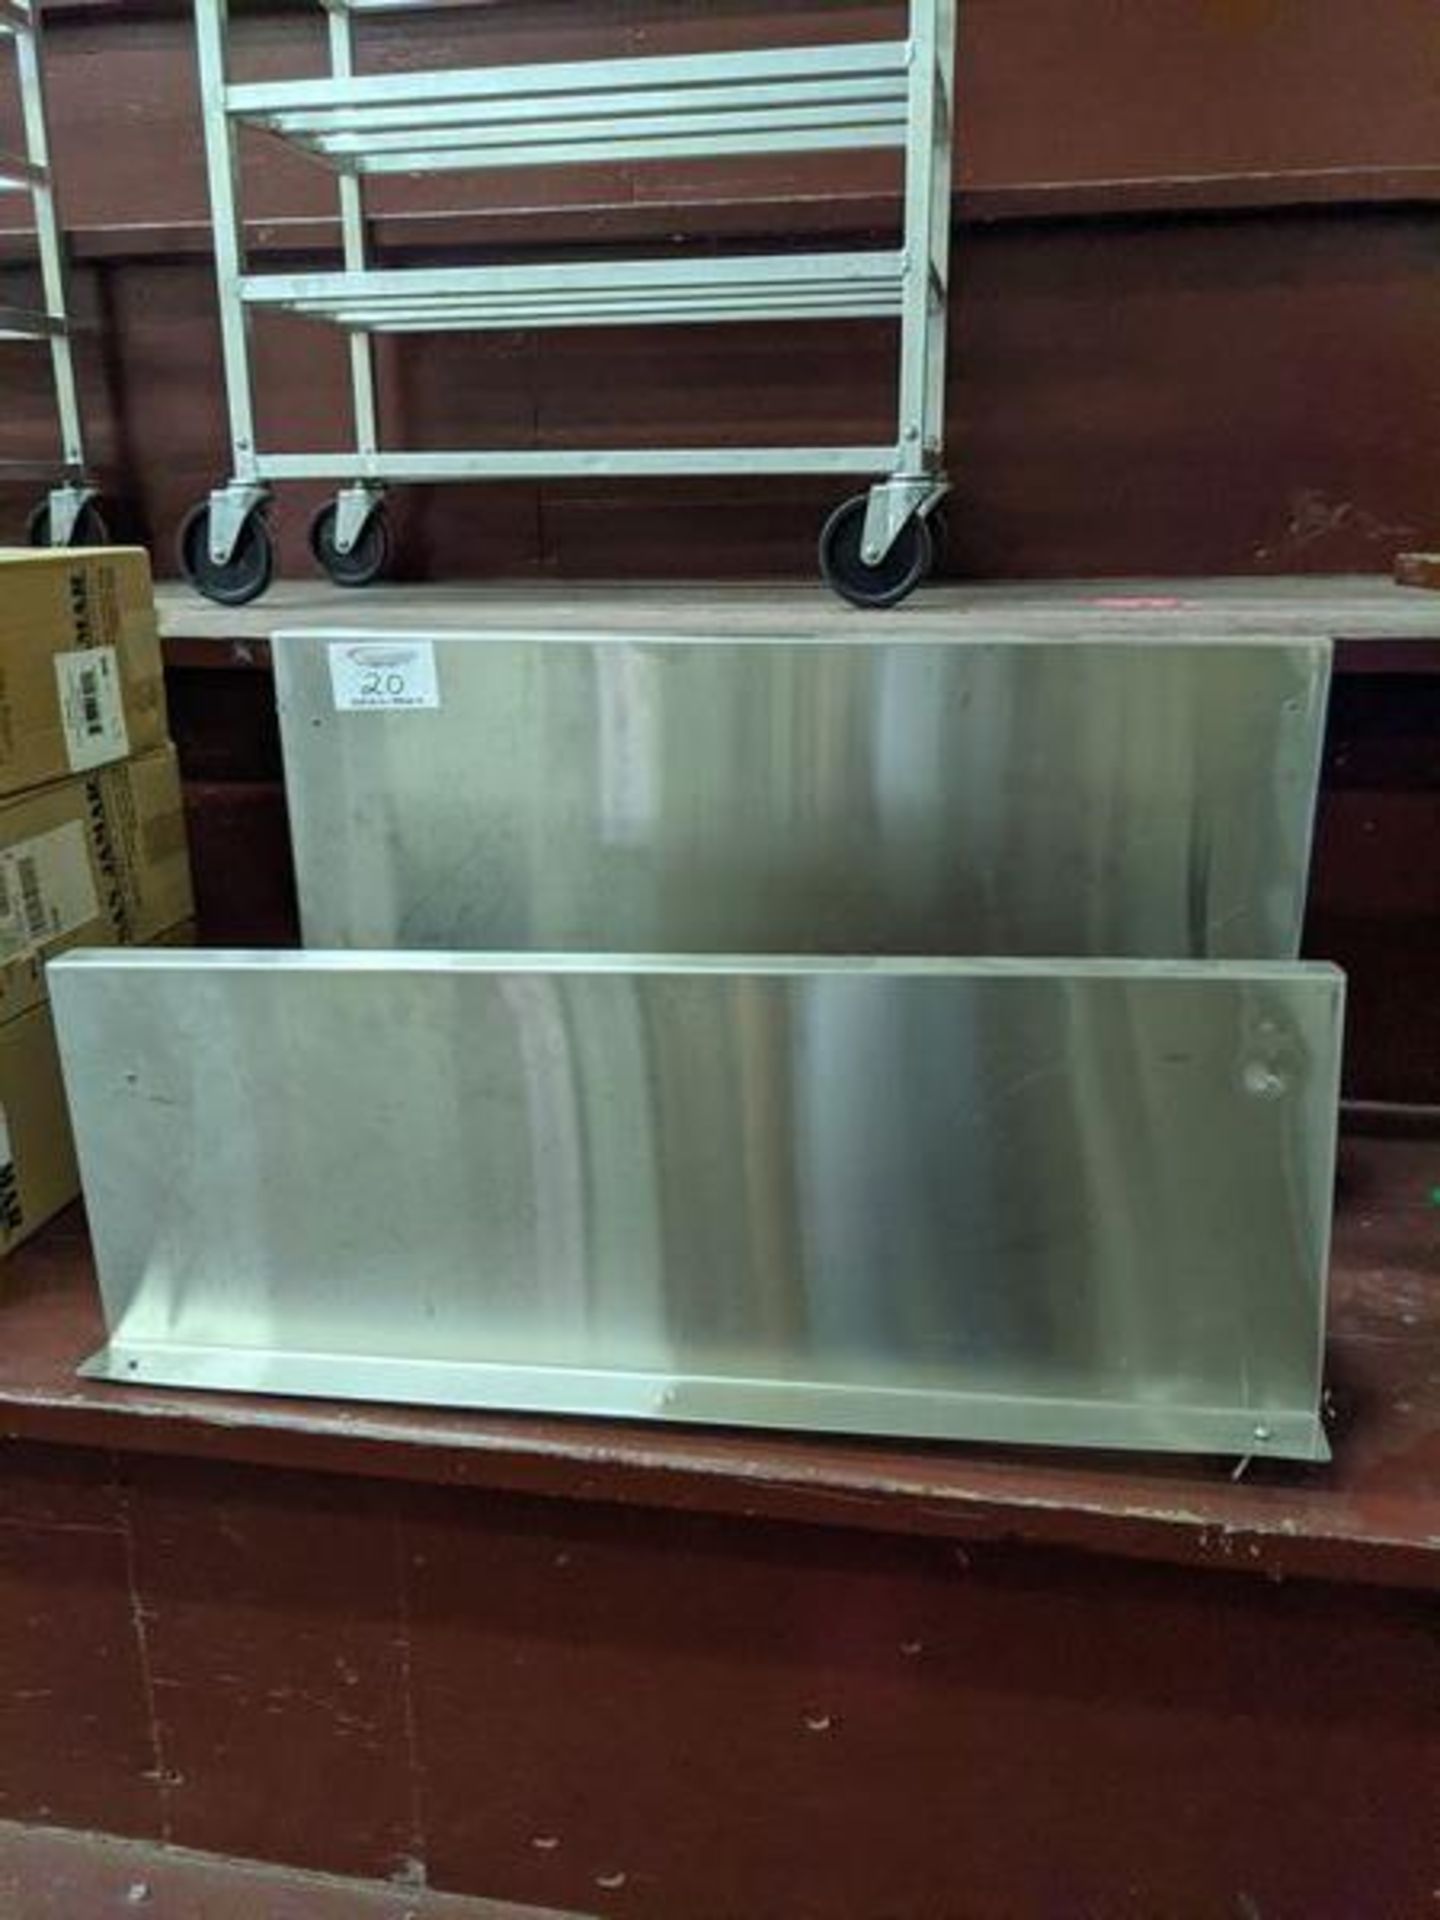 Two 36" Stainless Steel Wall Shelves